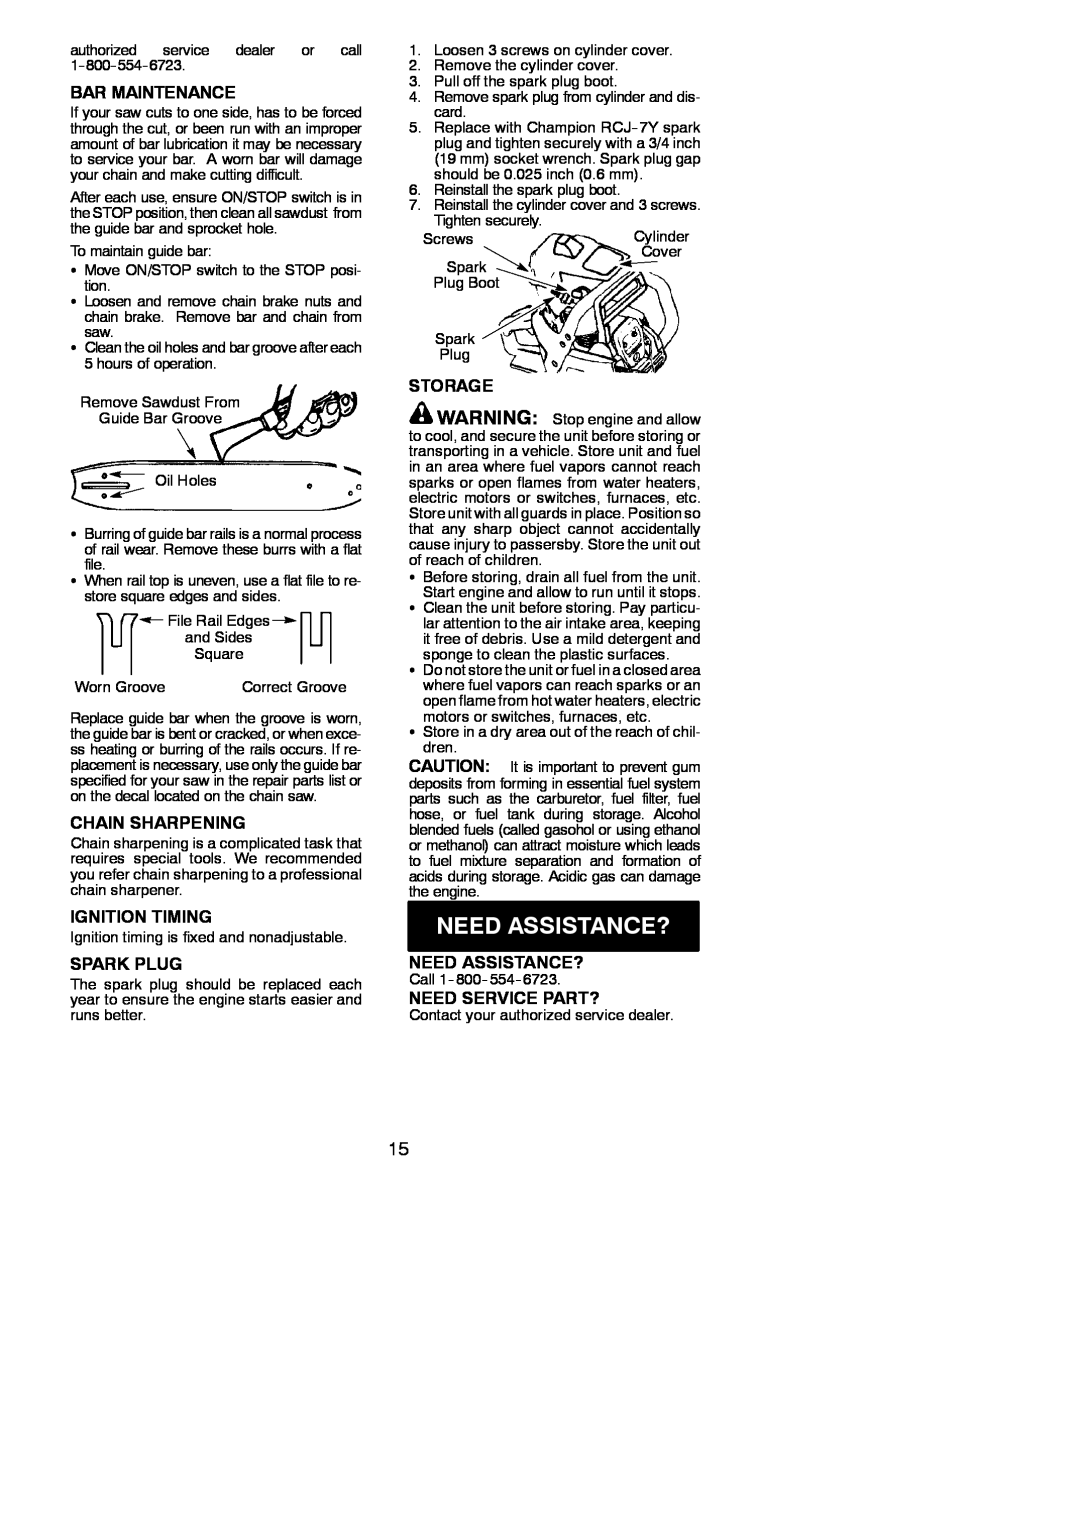 Poulan BH 2660 instruction manual Need Assistance?, Bar Maintenance, Chain Sharpening, Ignition Timing, Spark Plug, Storage 